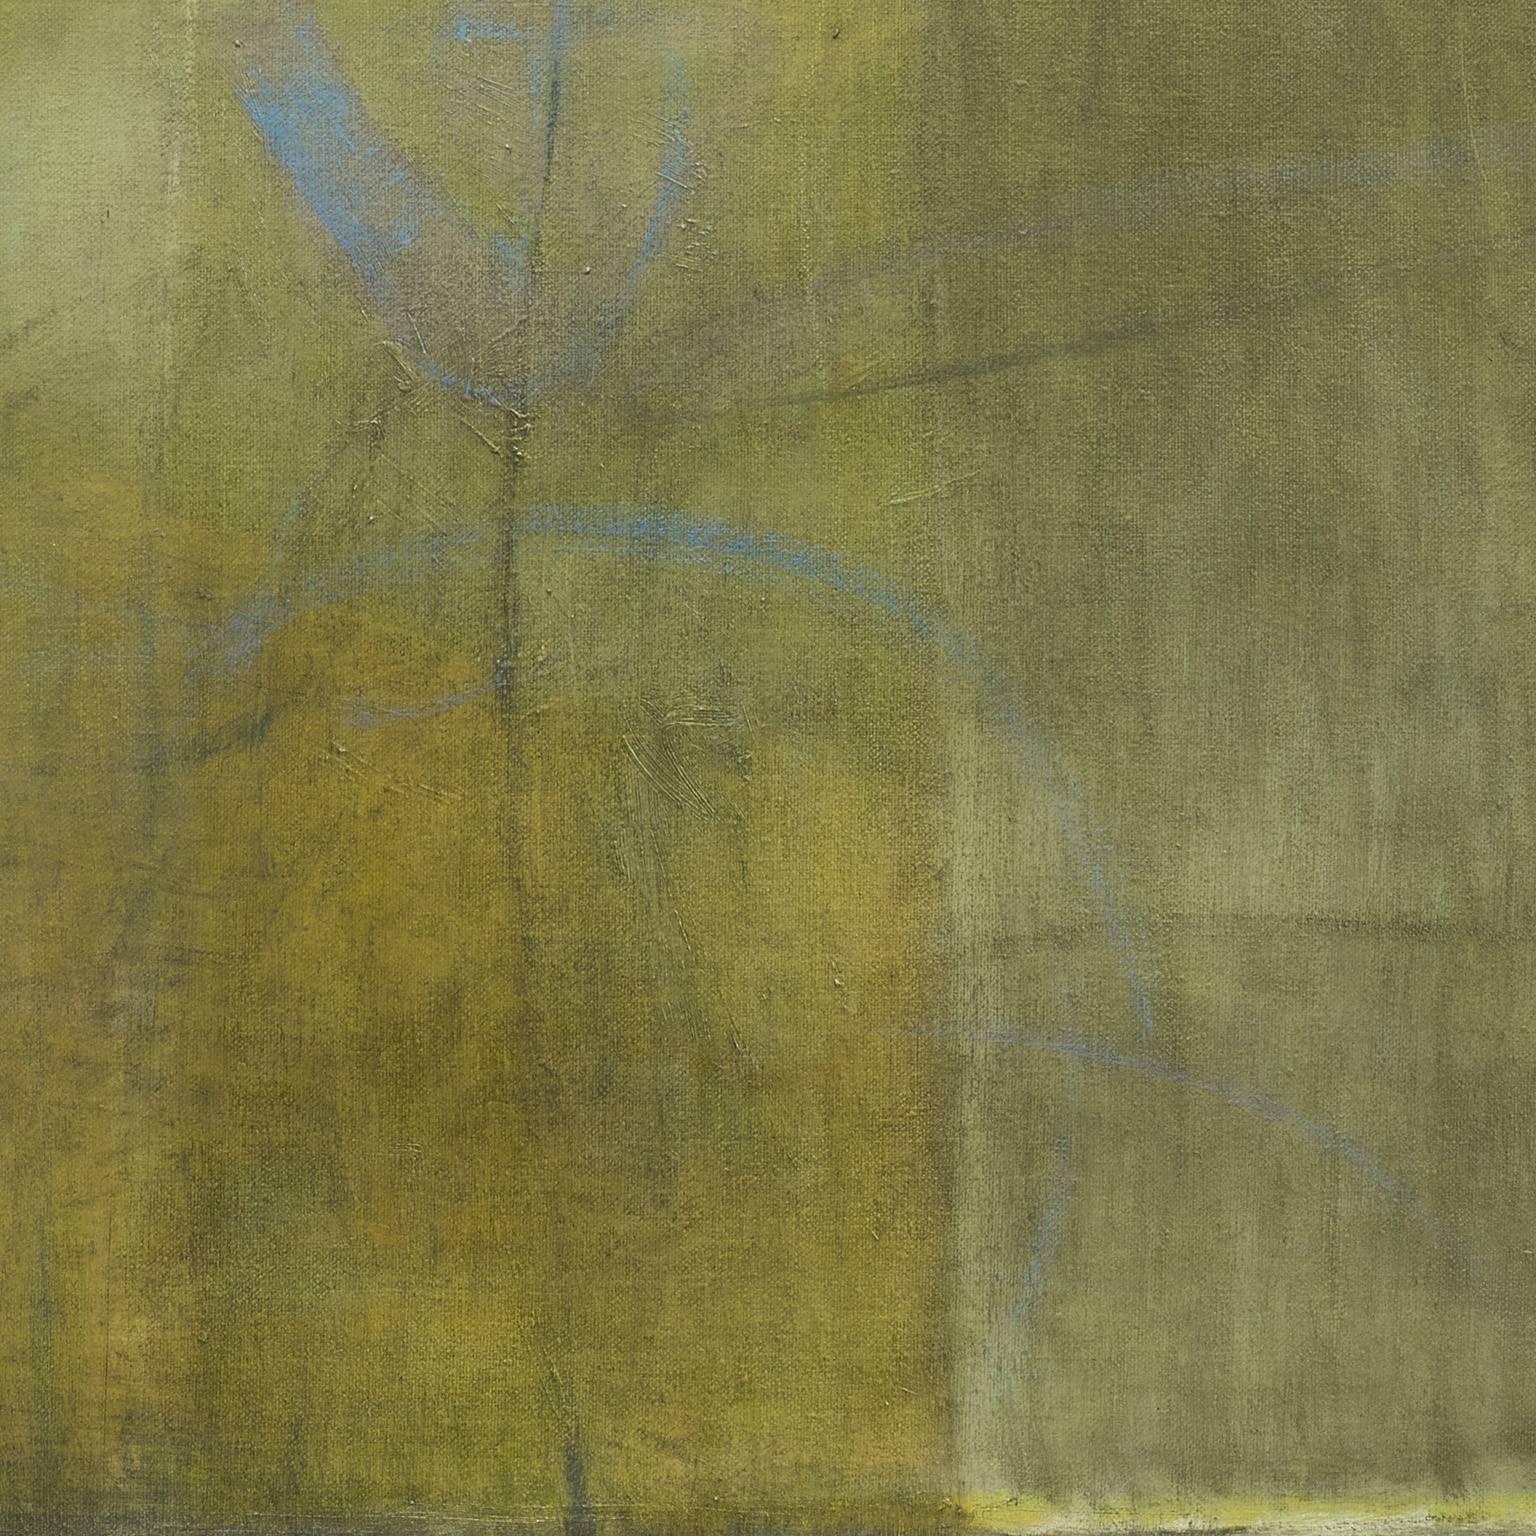 Vitrales Amarillo 4 - Abstract Oil Painting with Green and Yellow Colors - Brown Abstract Painting by Alfredo Aya